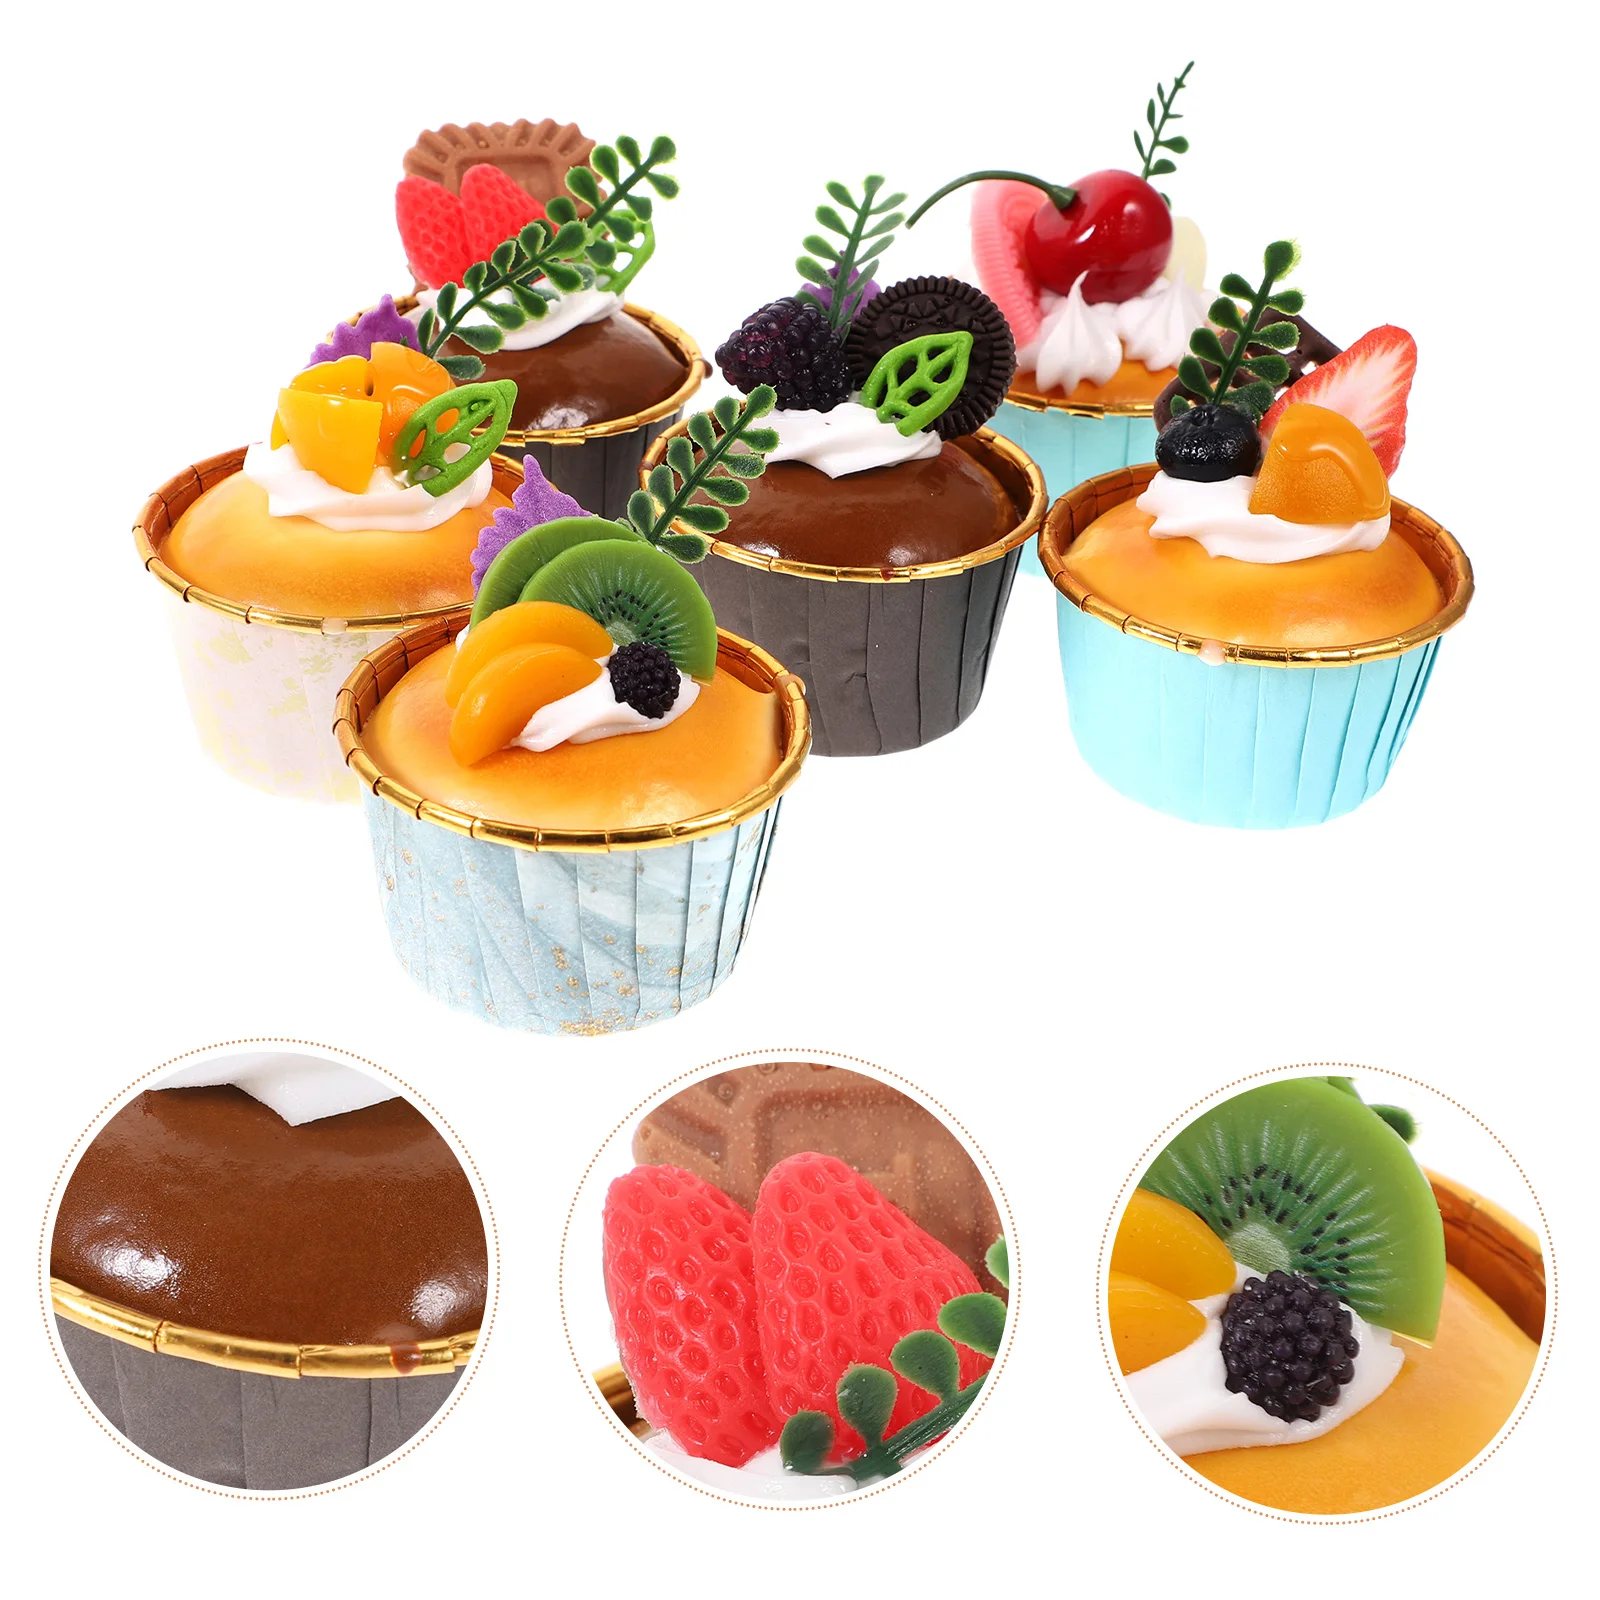 

Cake Artificial Fake Simulation Model Dessert Cupcakes Cakes Cupcake Realistic Props Toy Faux Display Toys Models Decor Play